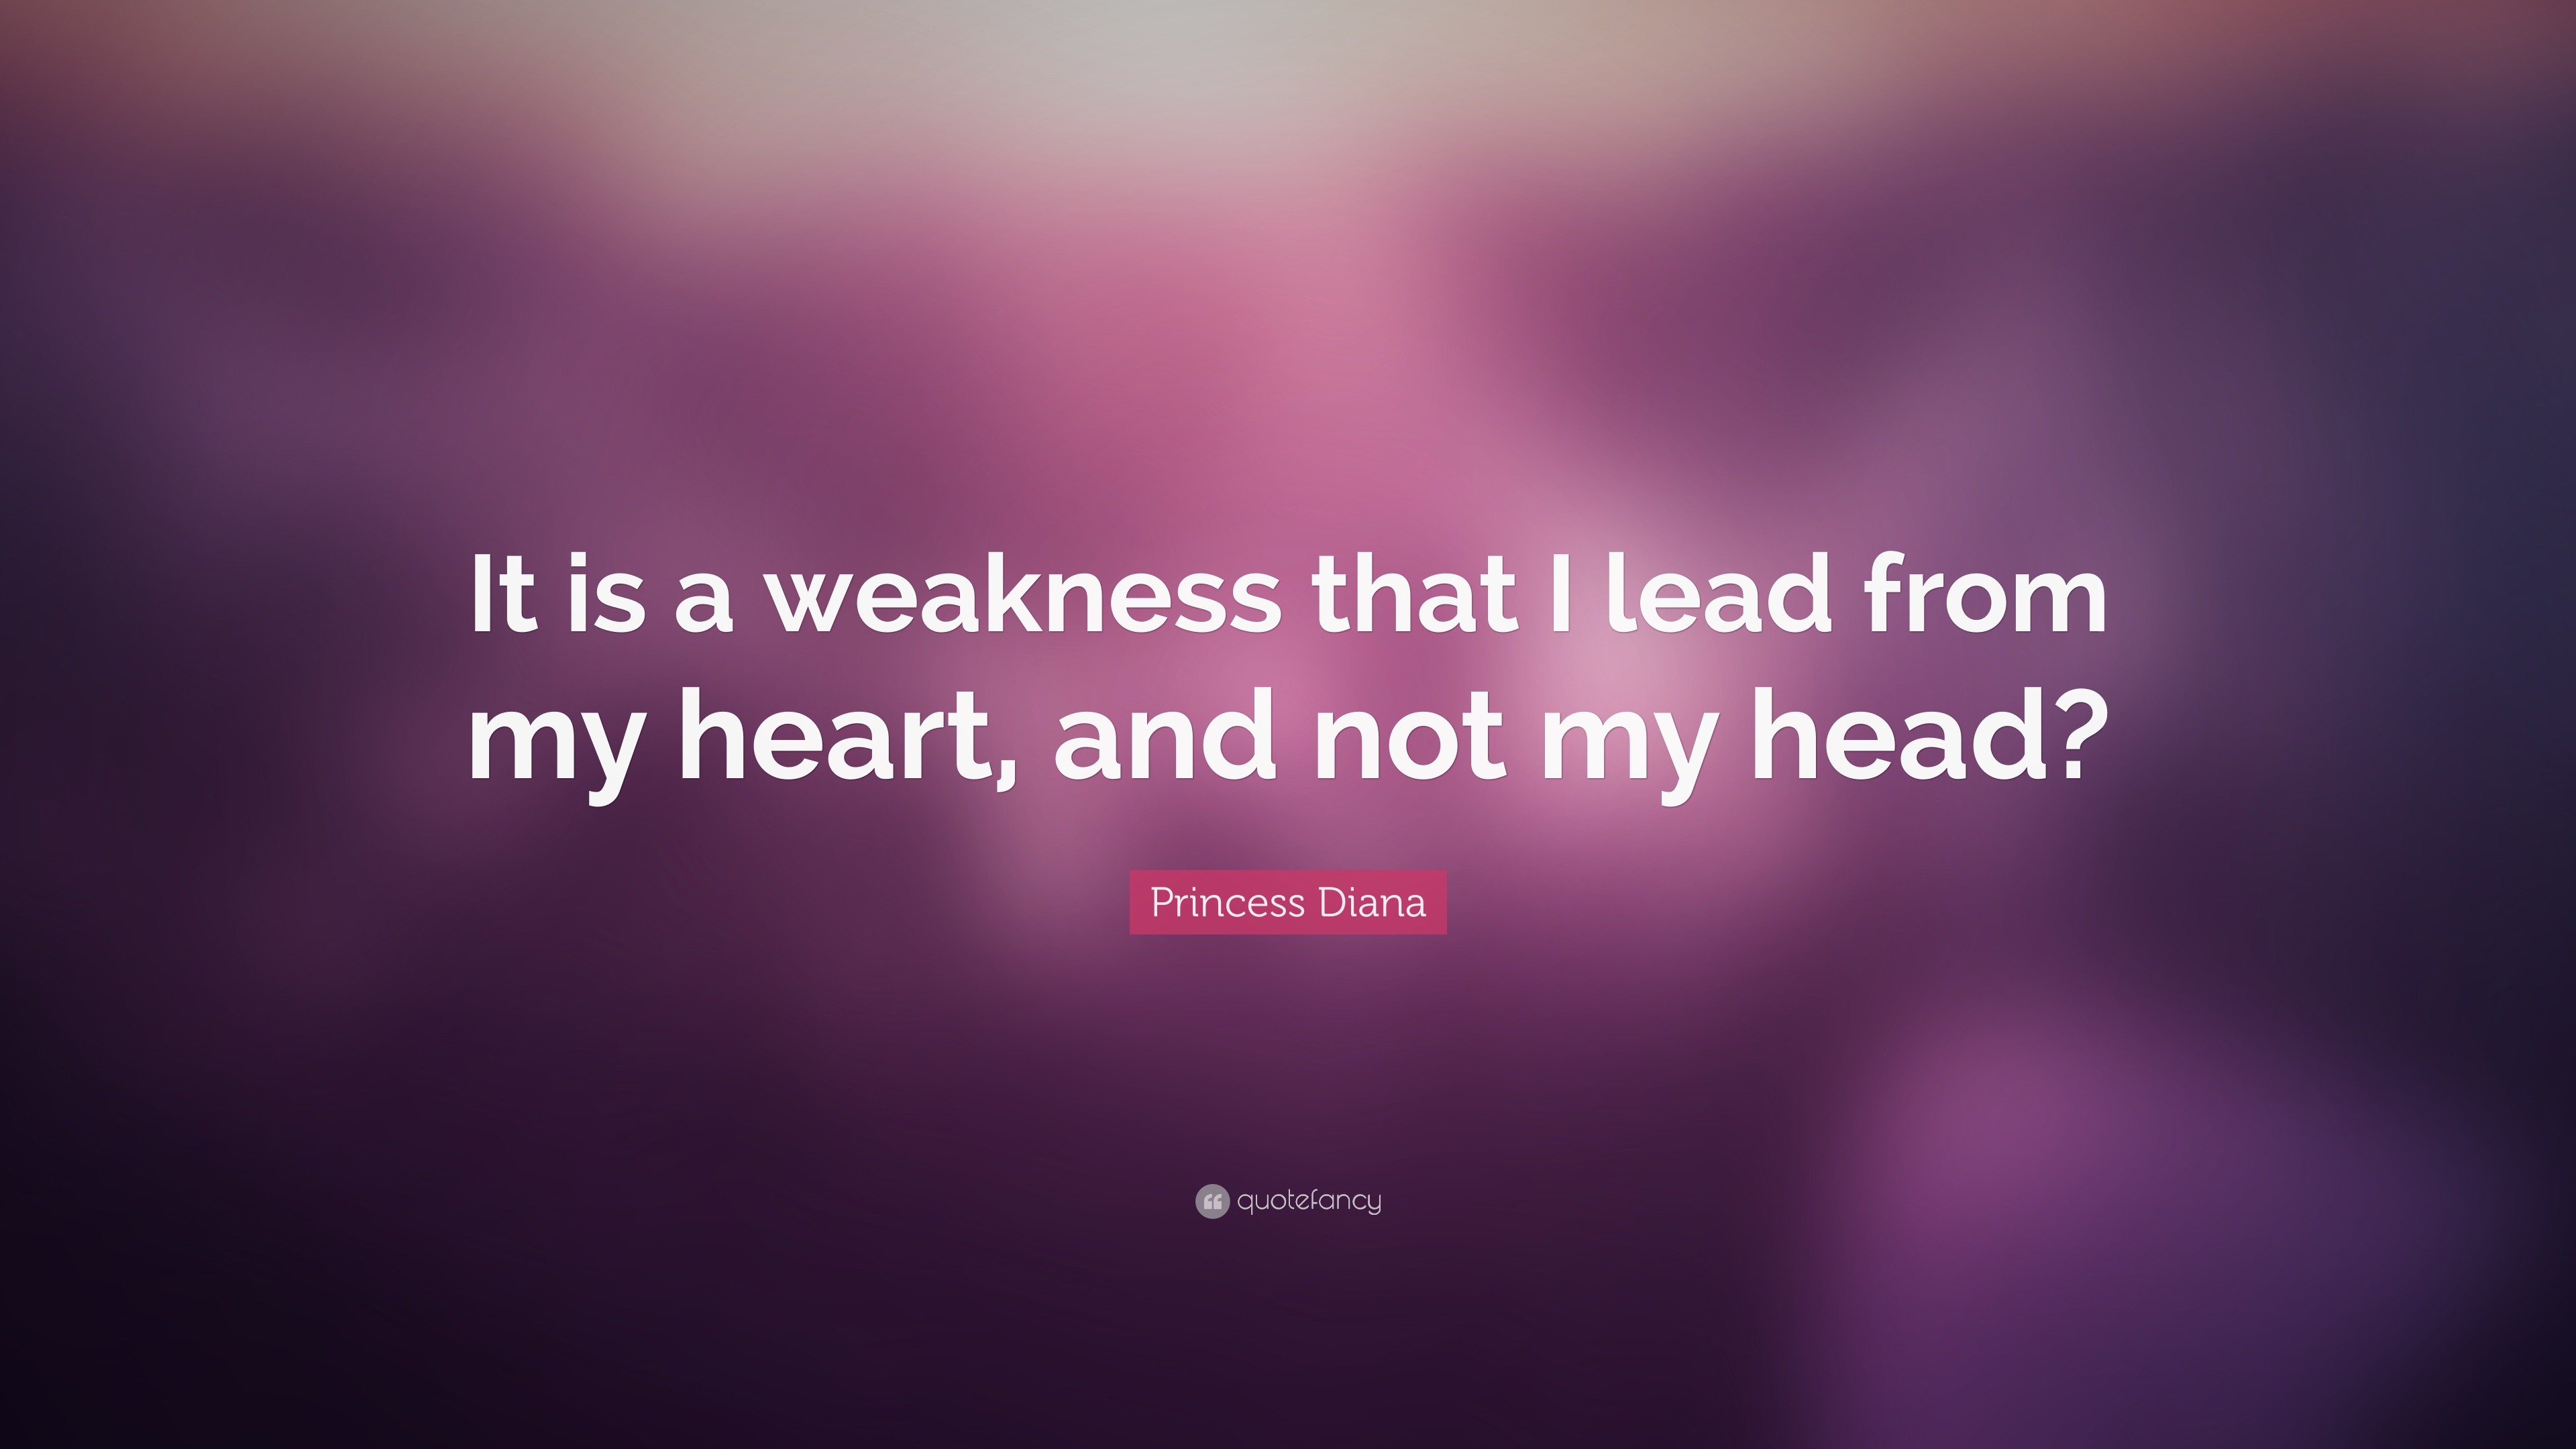 Princess Diana Quote It Is A Weakness That I Lead From My Heart And Not My